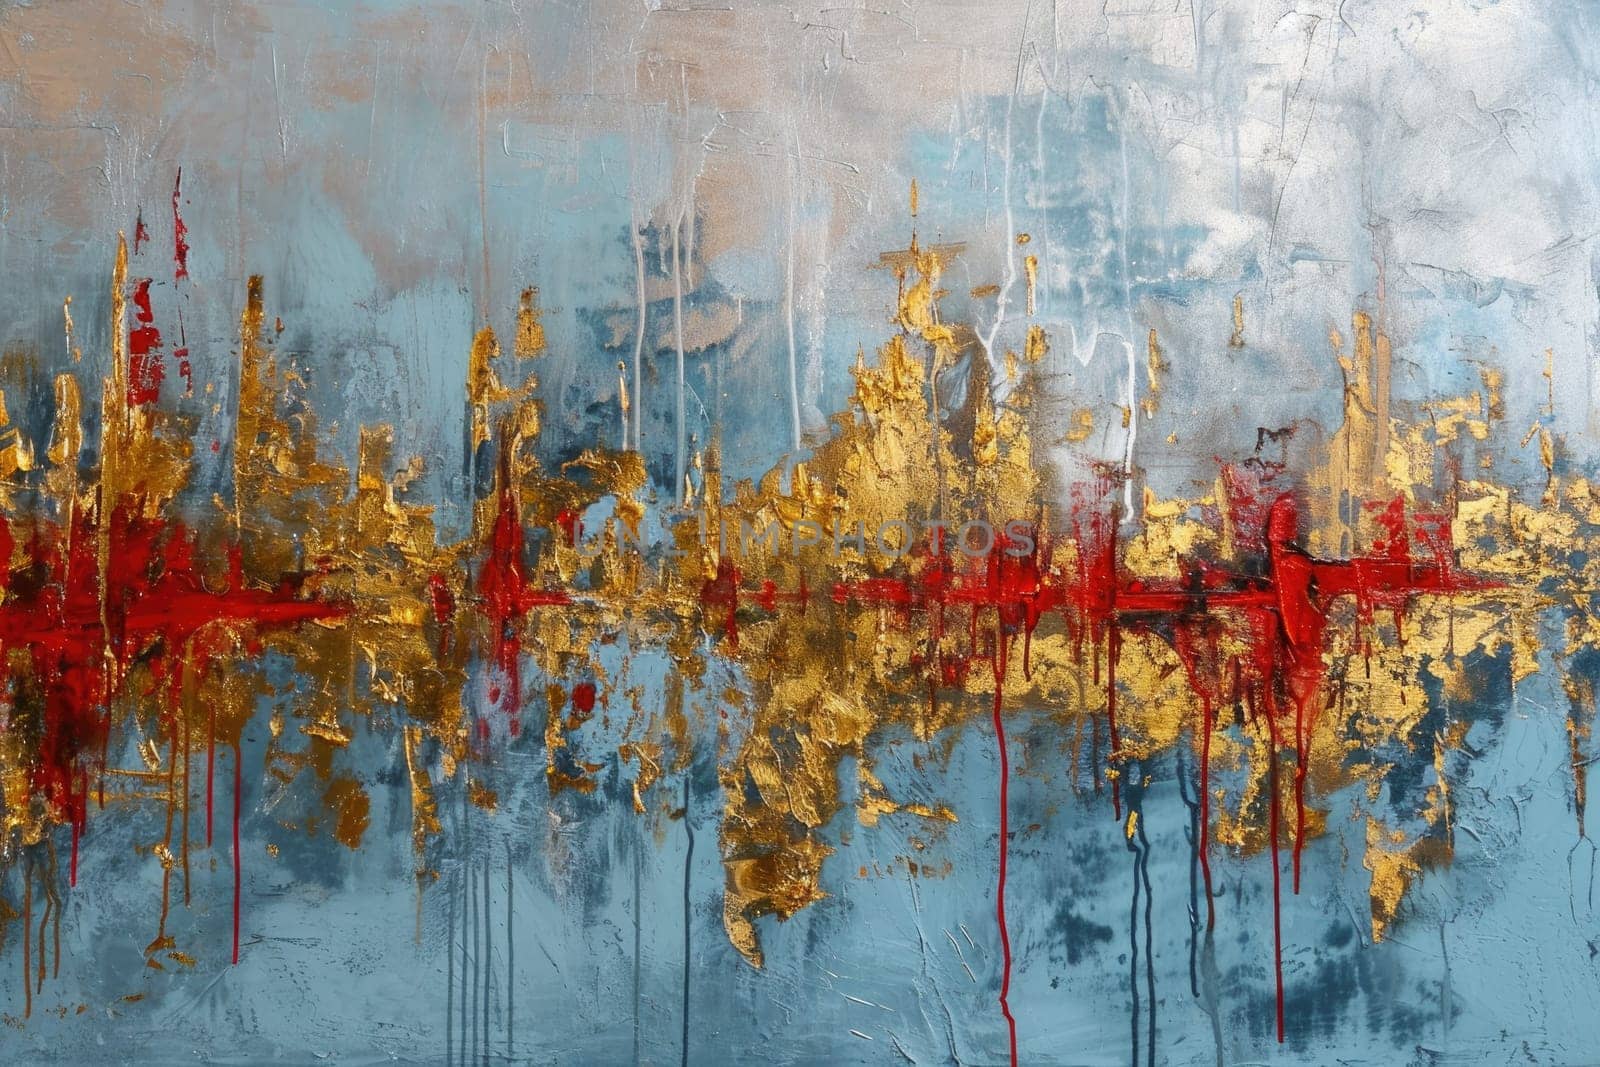 An abstract picture of gold, blue and red color painted on background. AIGX01. by biancoblue